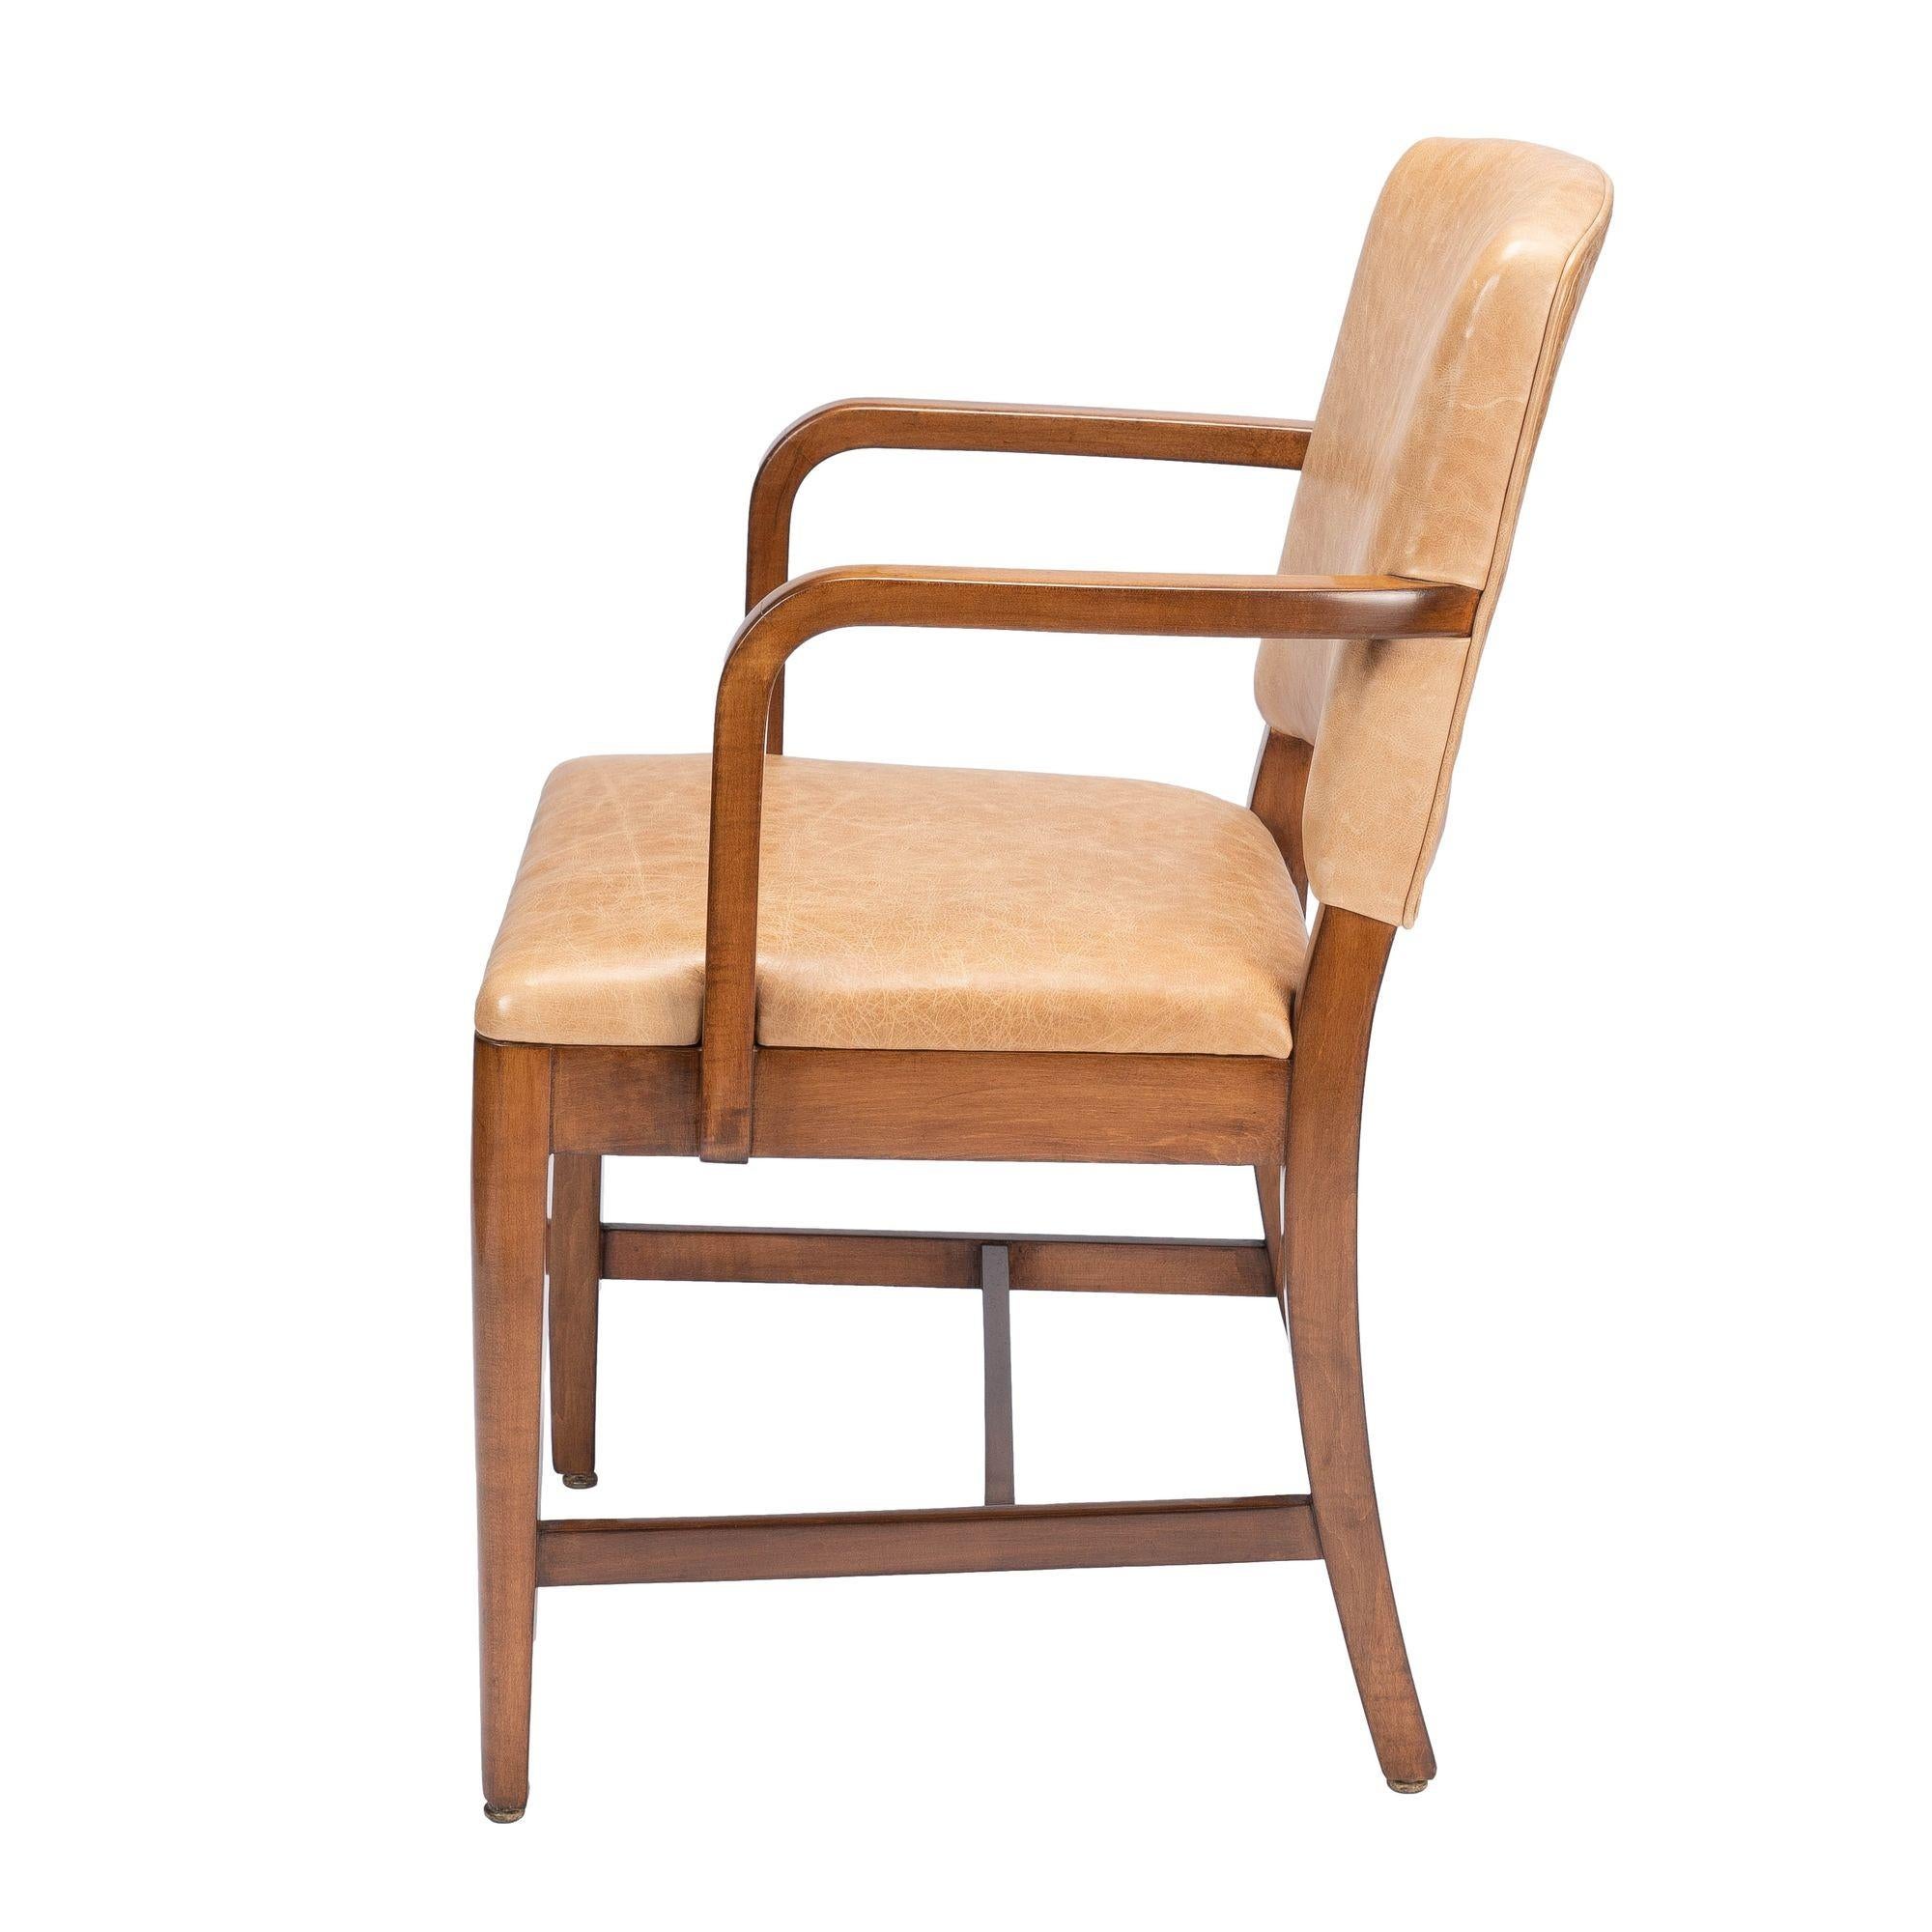 Mid-Century Modern American Modernist Maple & Leather Armchair, c. 1940 For Sale